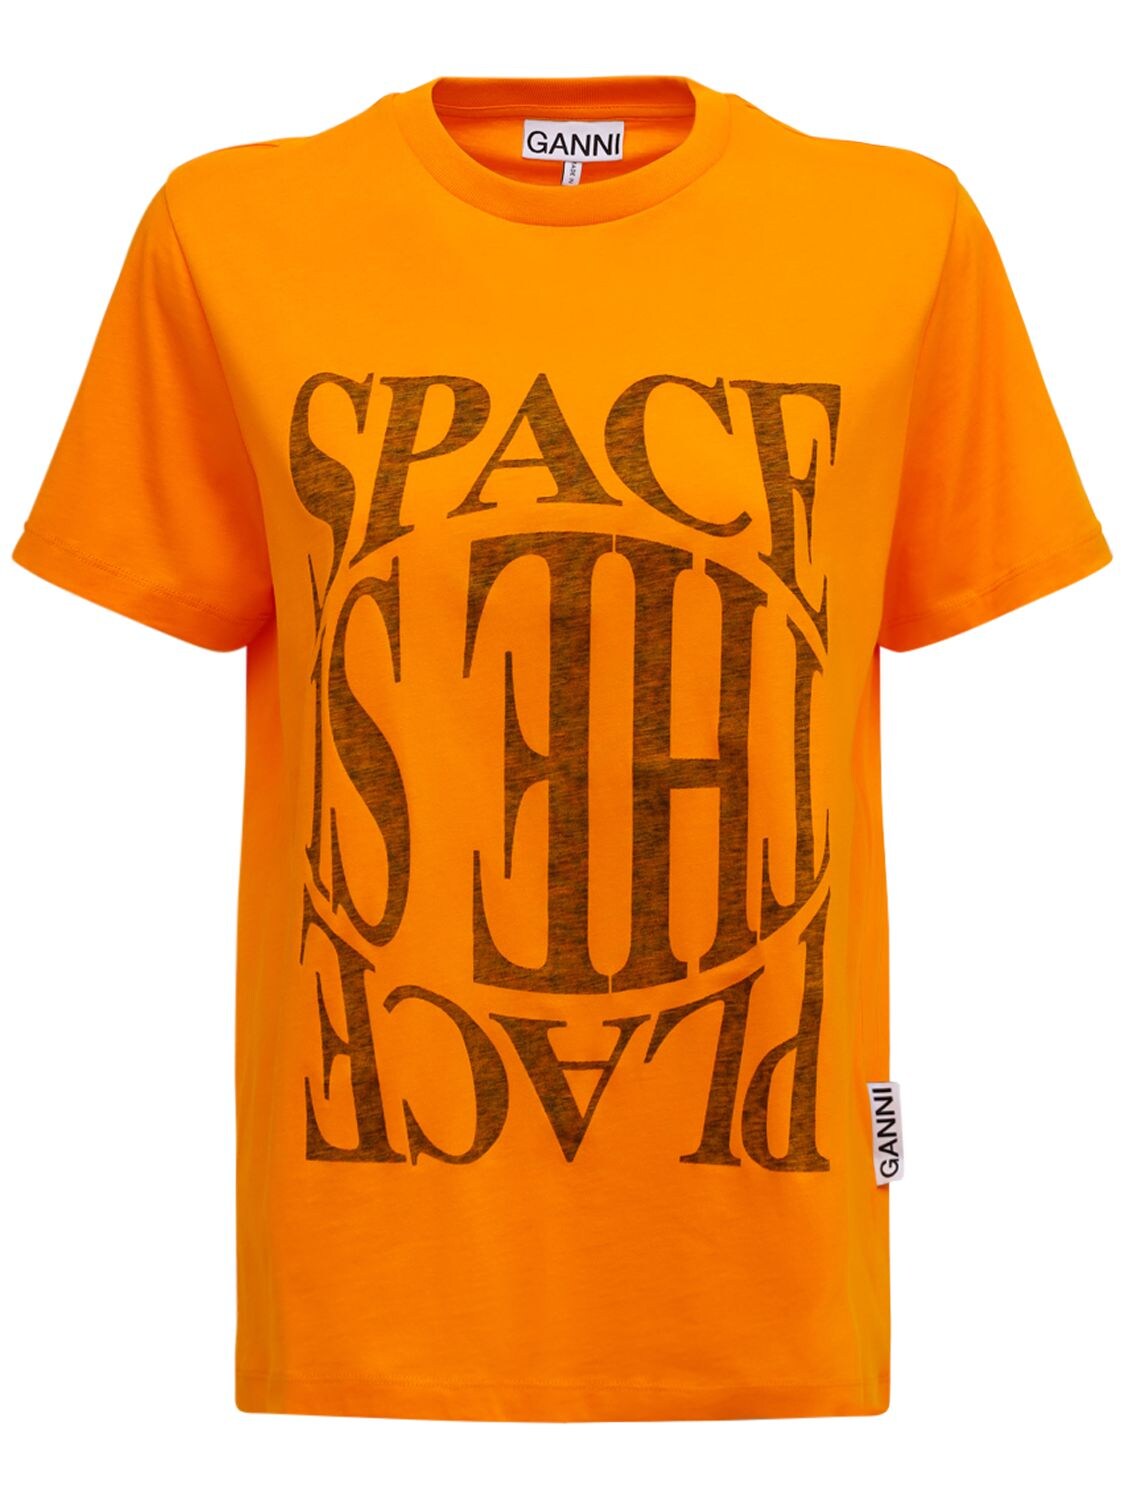 Space Printed Cotton Jersey  T-shirt